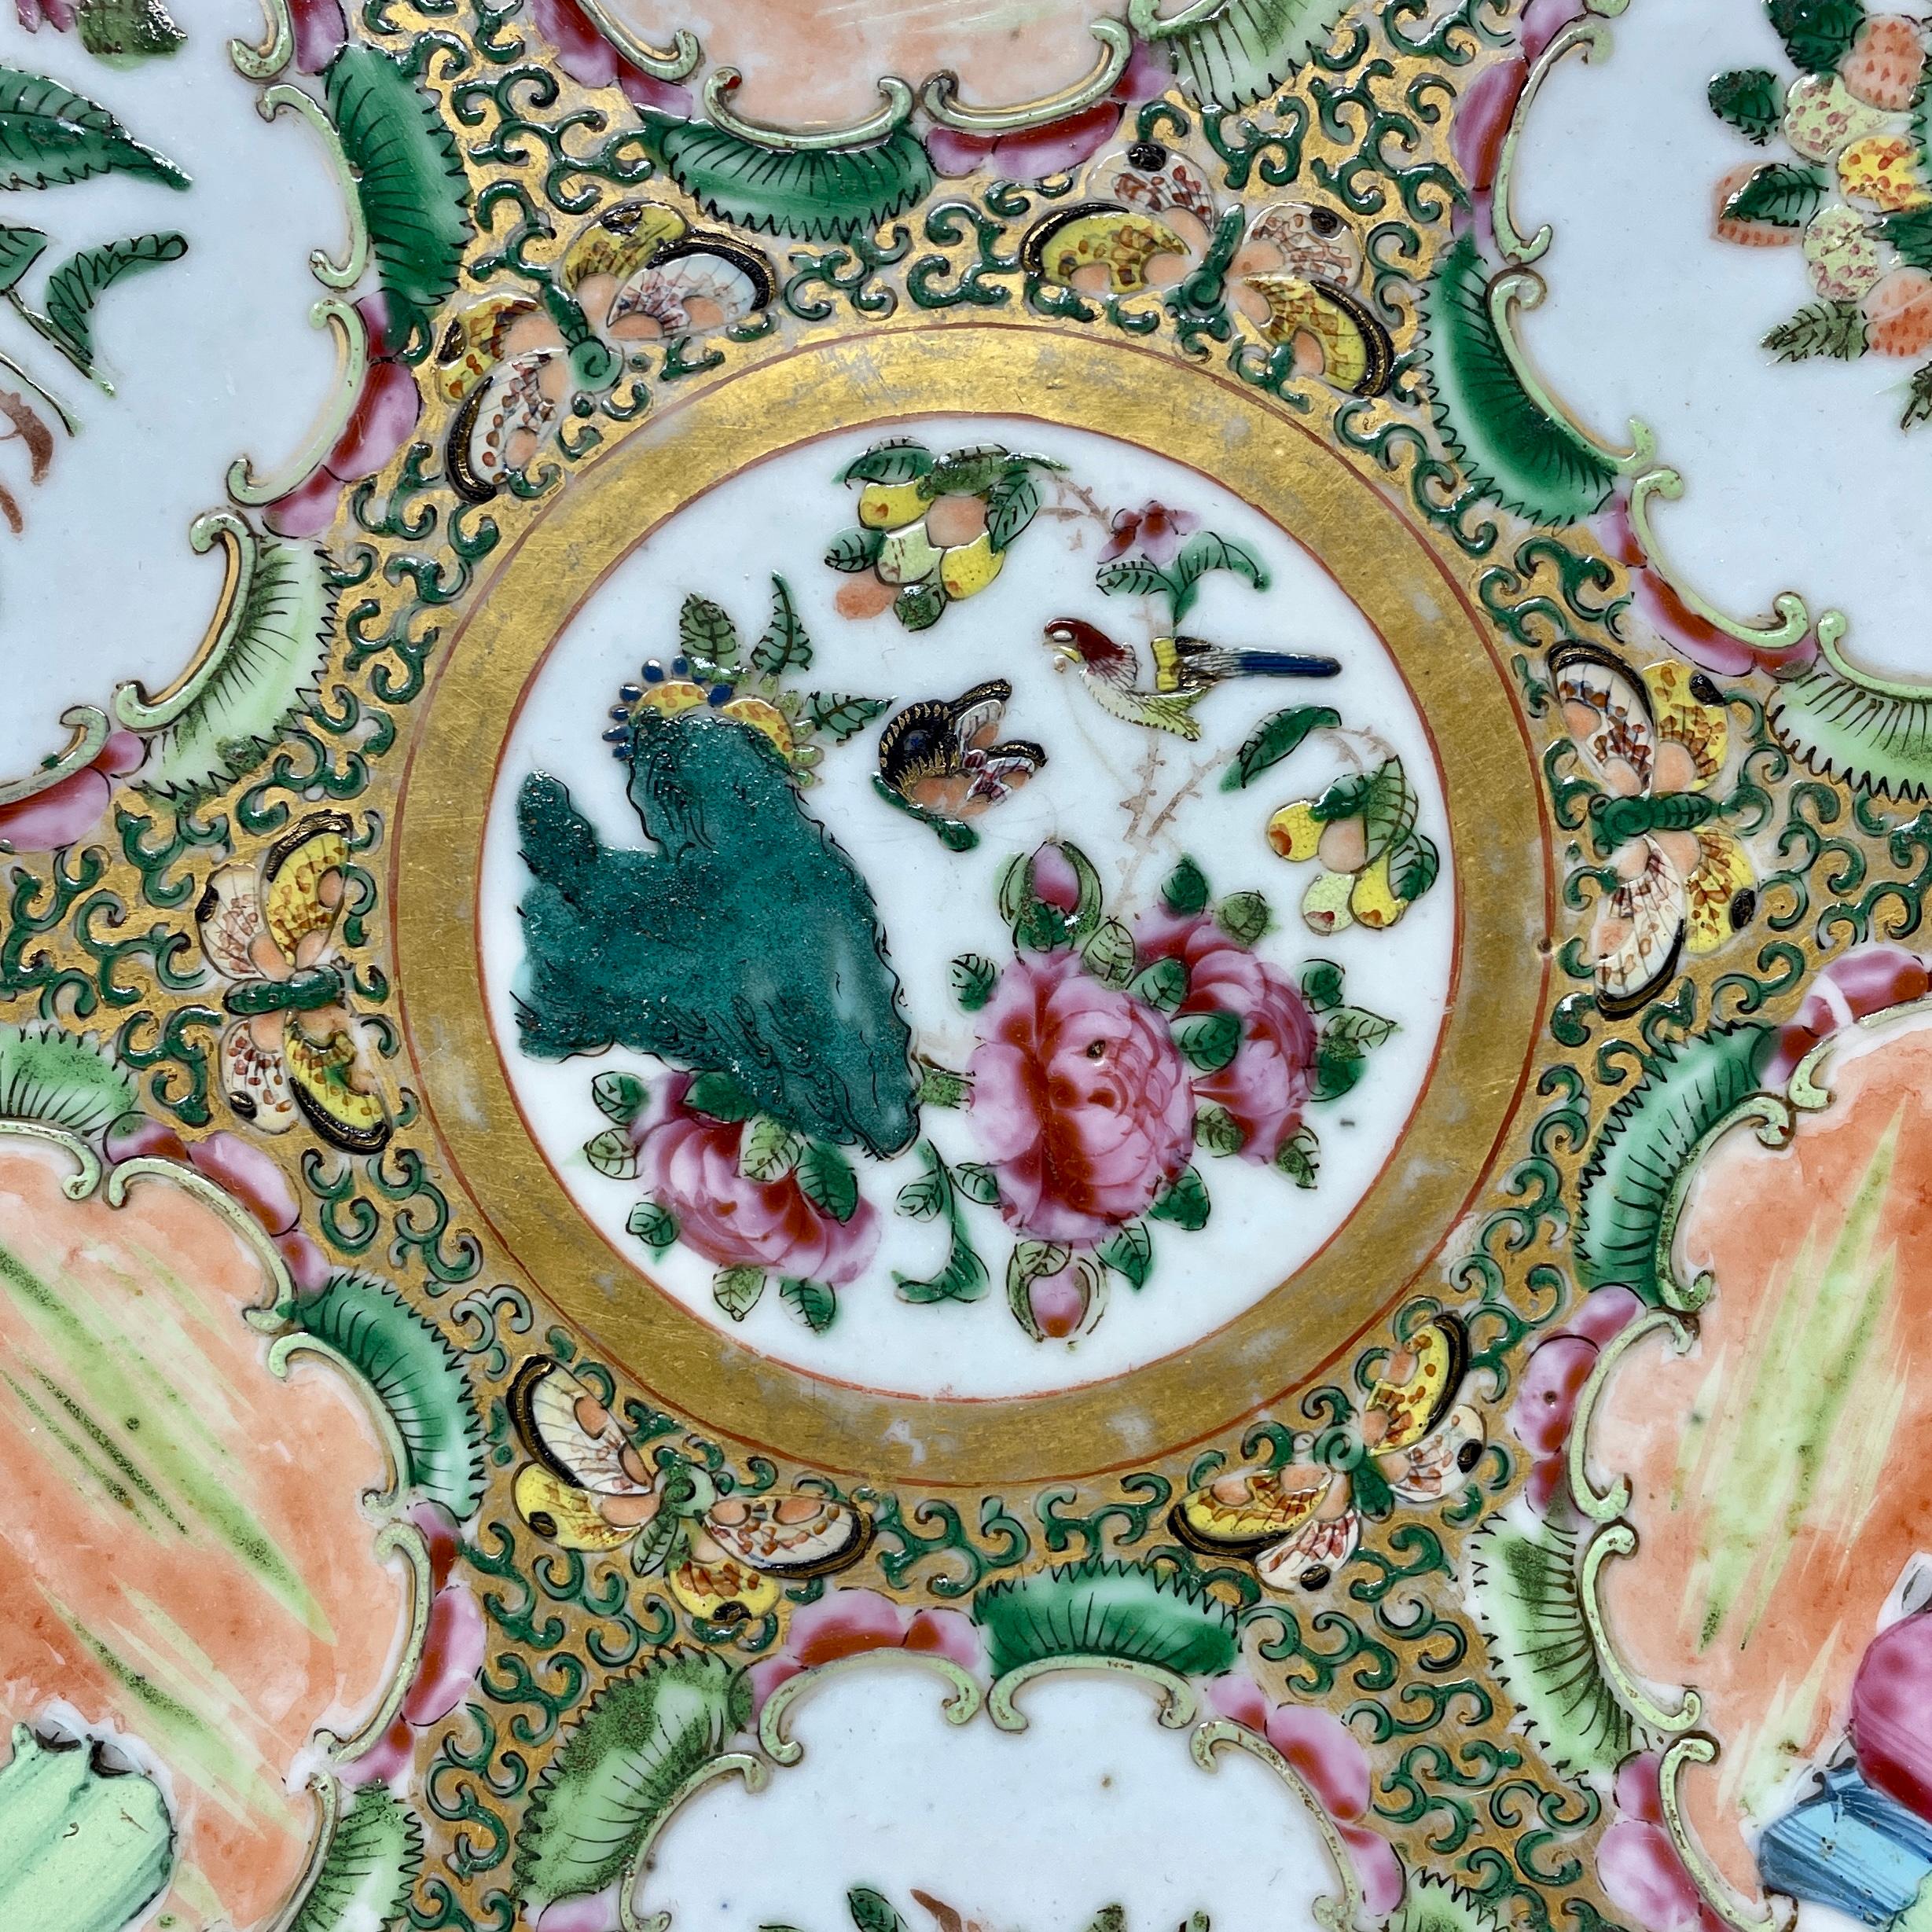 Large Antique Chinese Famille Rose Porcelain Charger Plate, Circa 1880-1890 In Good Condition For Sale In New Orleans, LA